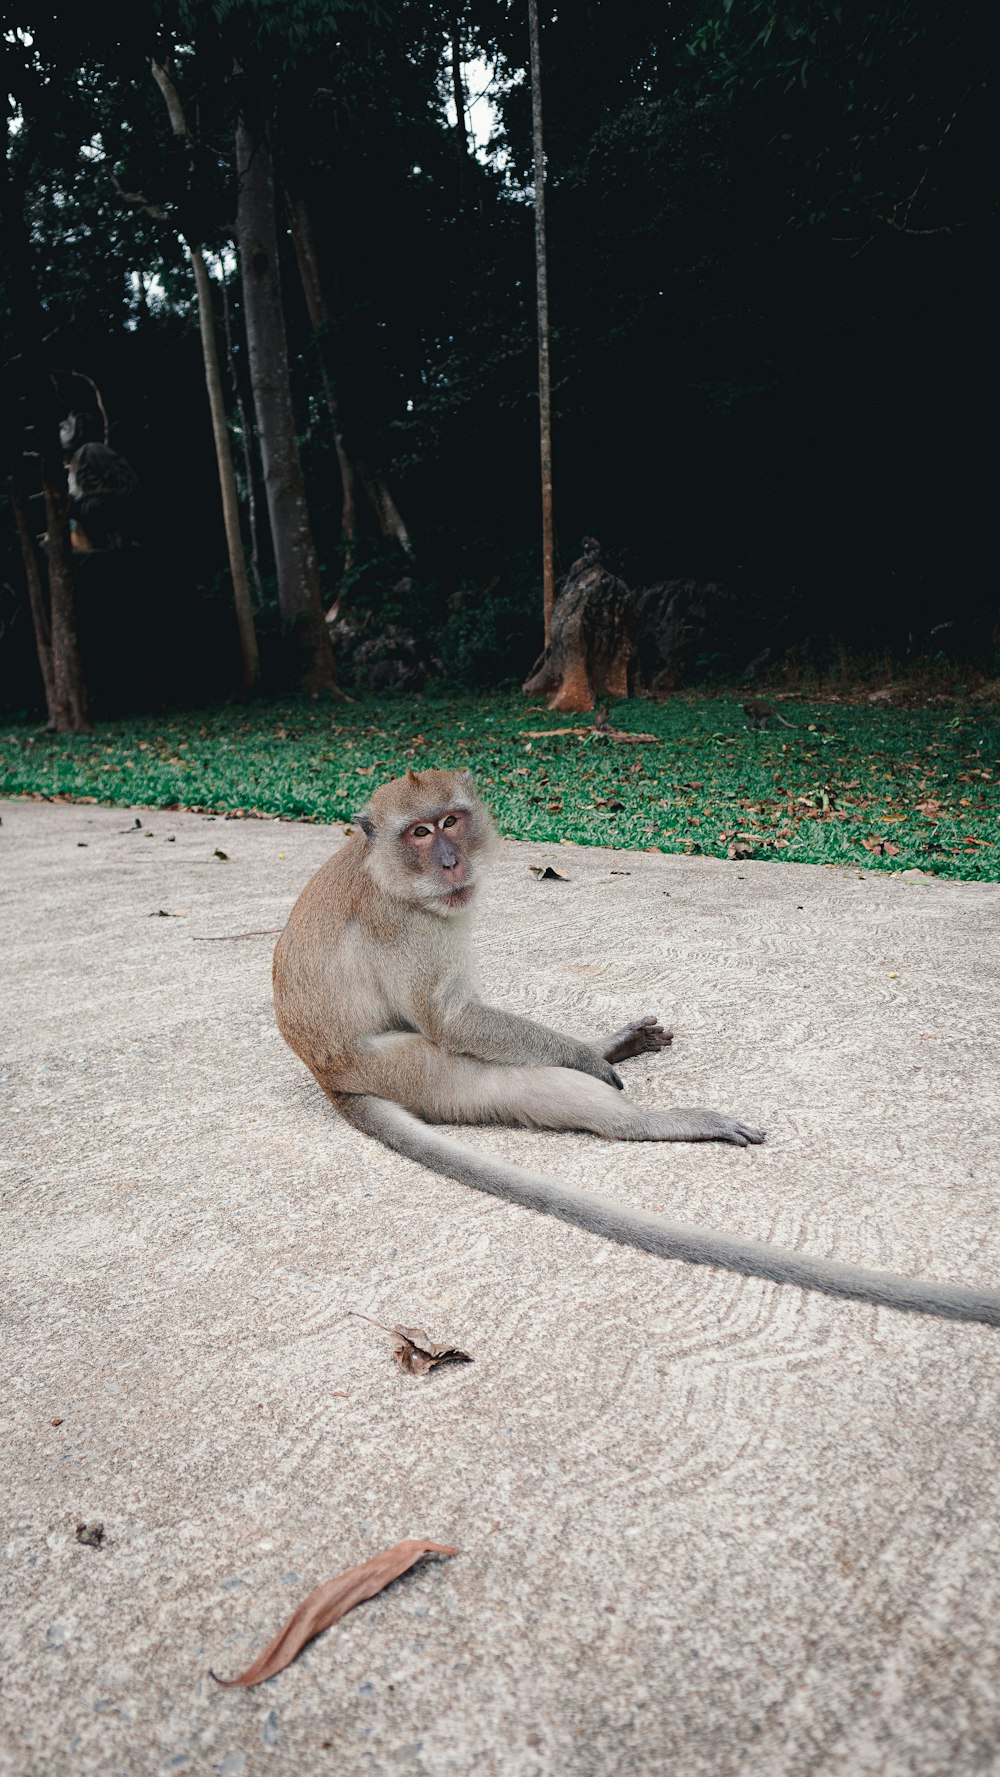 a monkey sitting on the ground in the middle of a forest